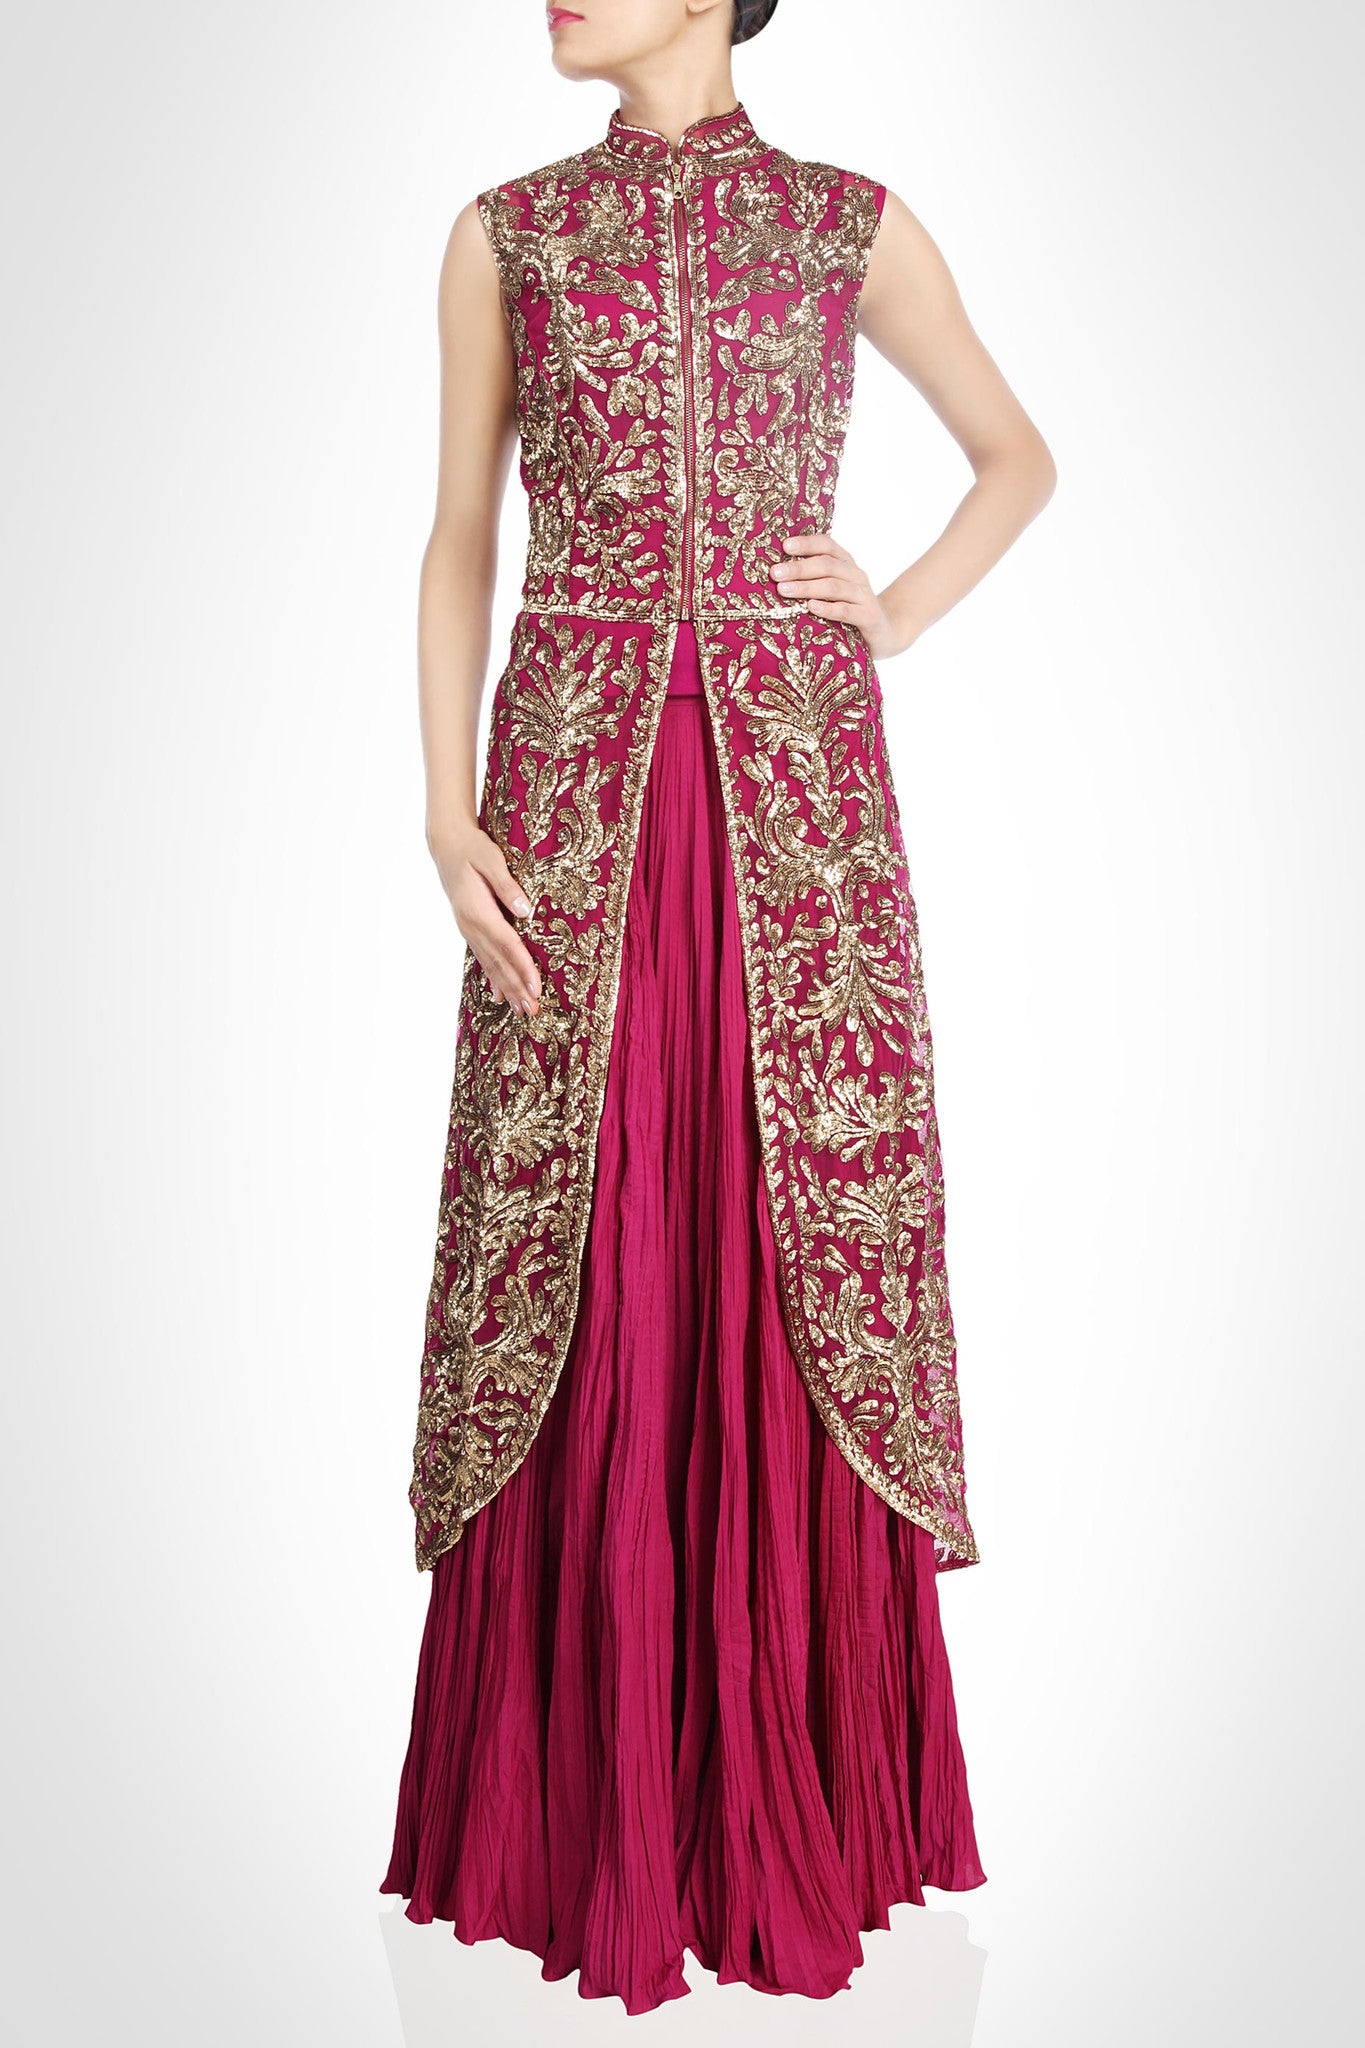 Indian Long Jacket Style Dresses | Fashion dresses, Gowns dresses,  Bollywood outfits